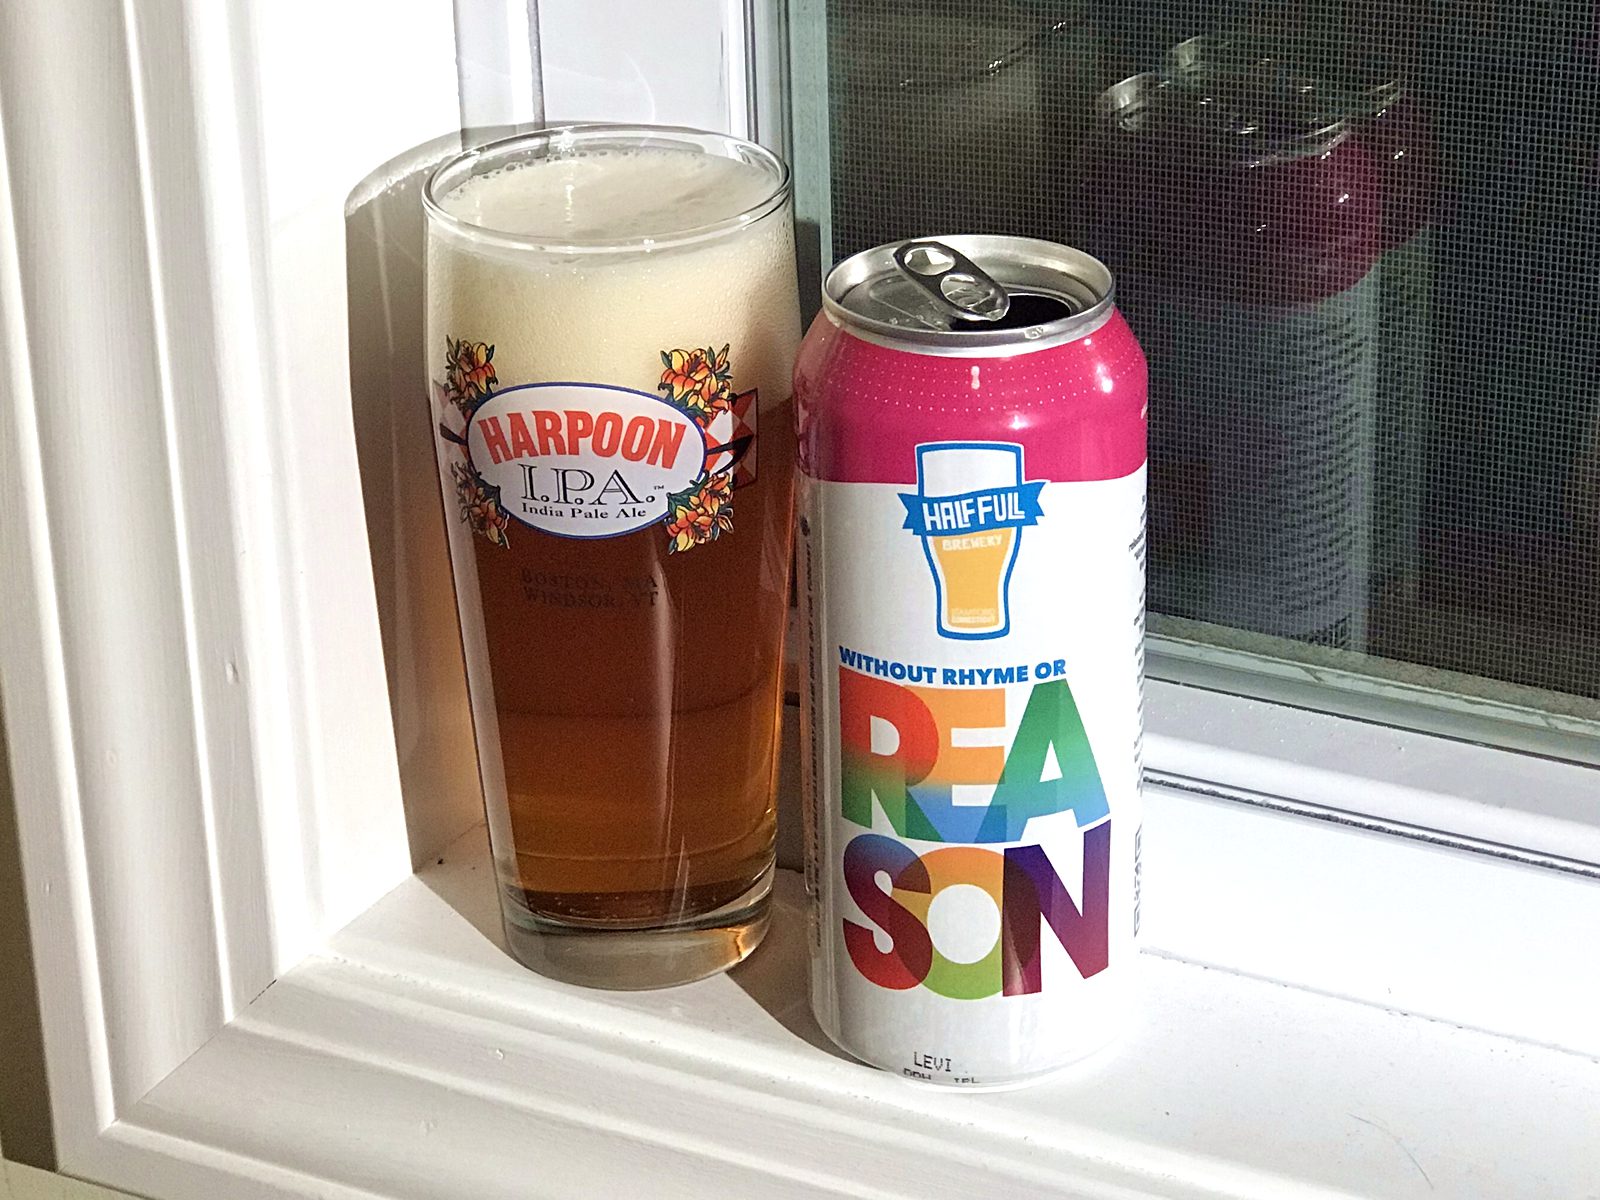 Half Full Brewery: Levi (Without Rhyme or Reason Release #3)